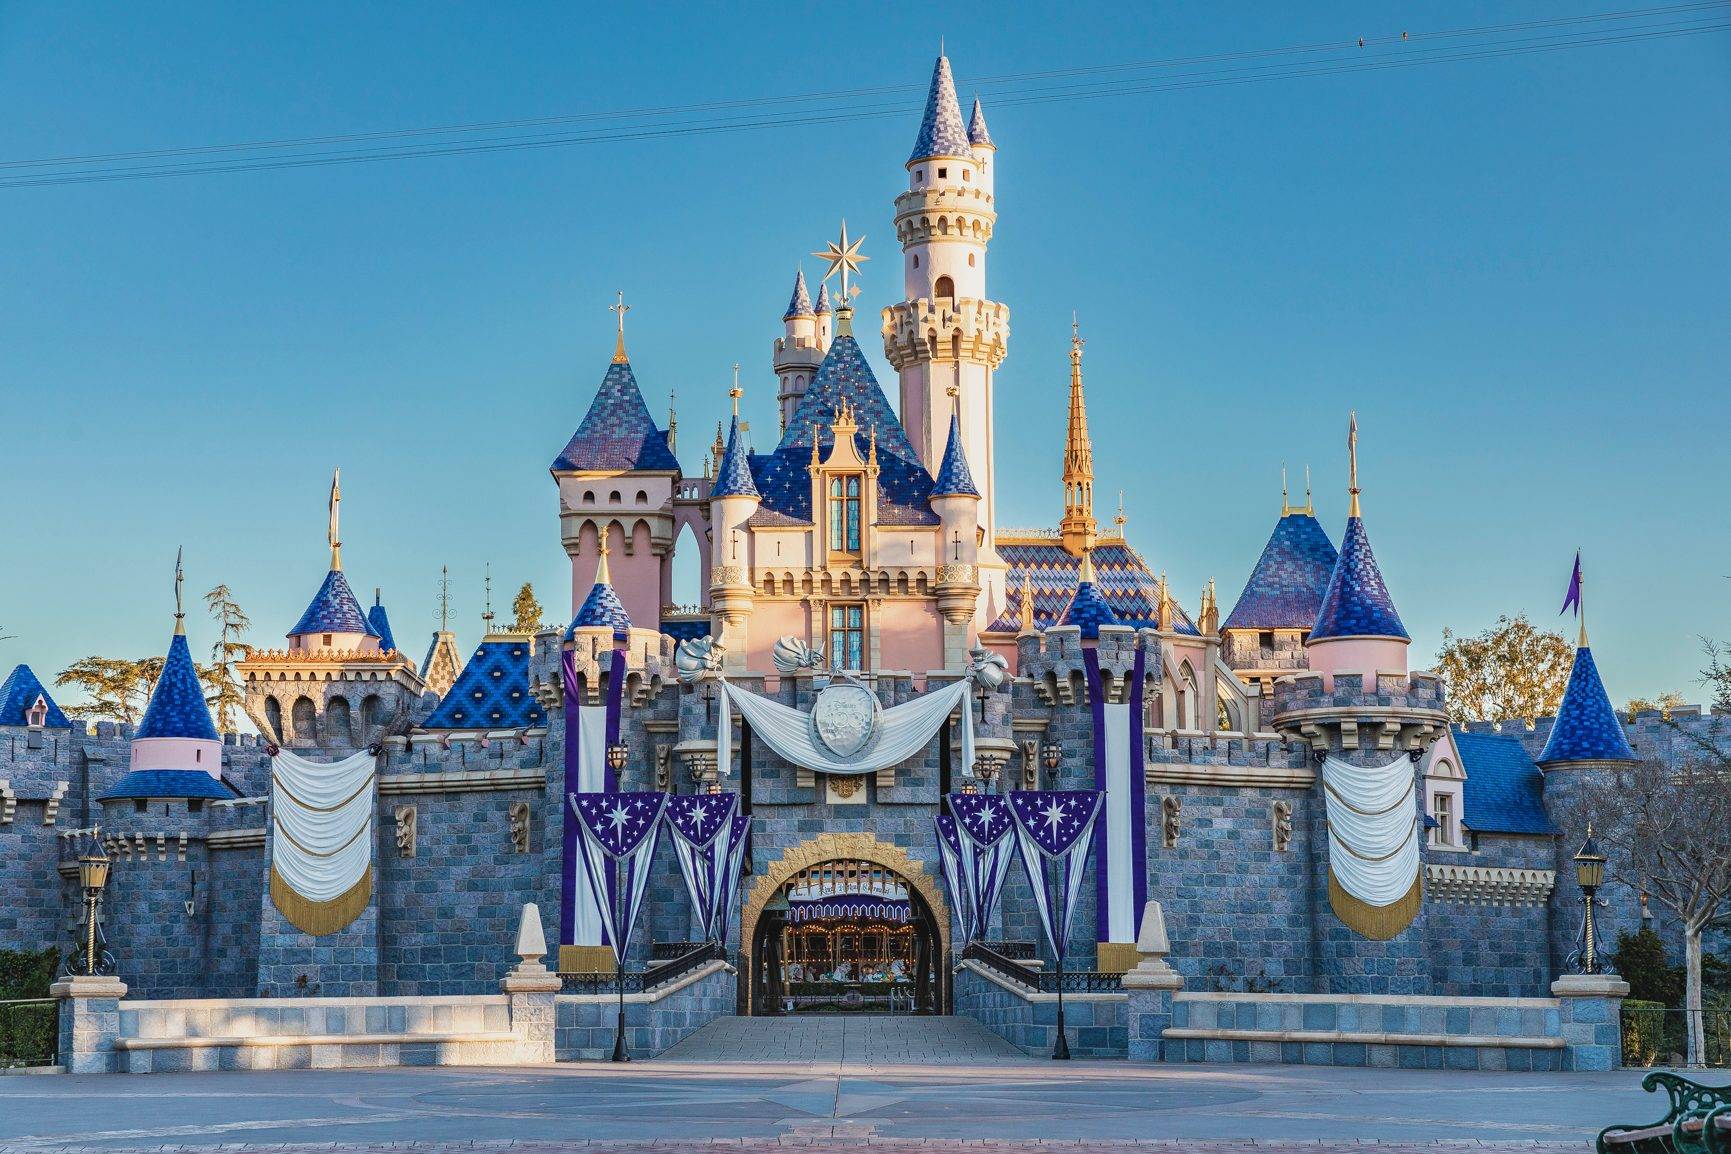 Get Ready to Pay More: Disneyland raises prices across the board